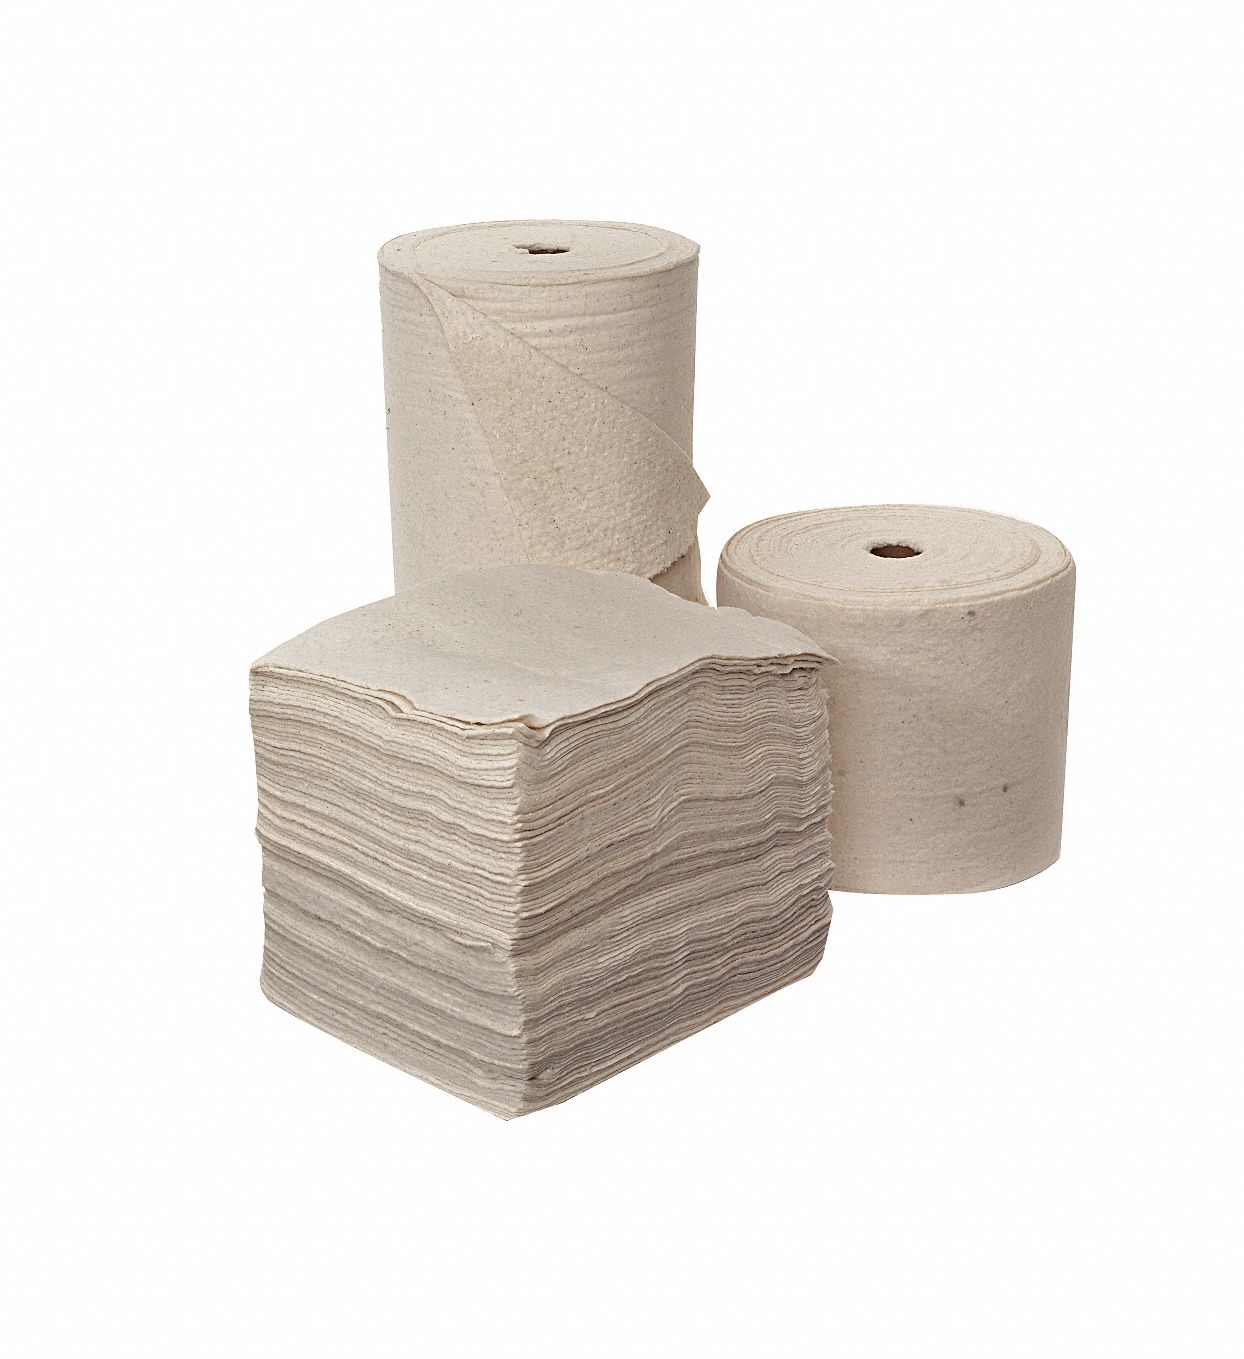 Heavy, Natural Fibers Absorbent Roll, Fluids Absorbed: Oil Only / Petroleum, 150 ft. Length